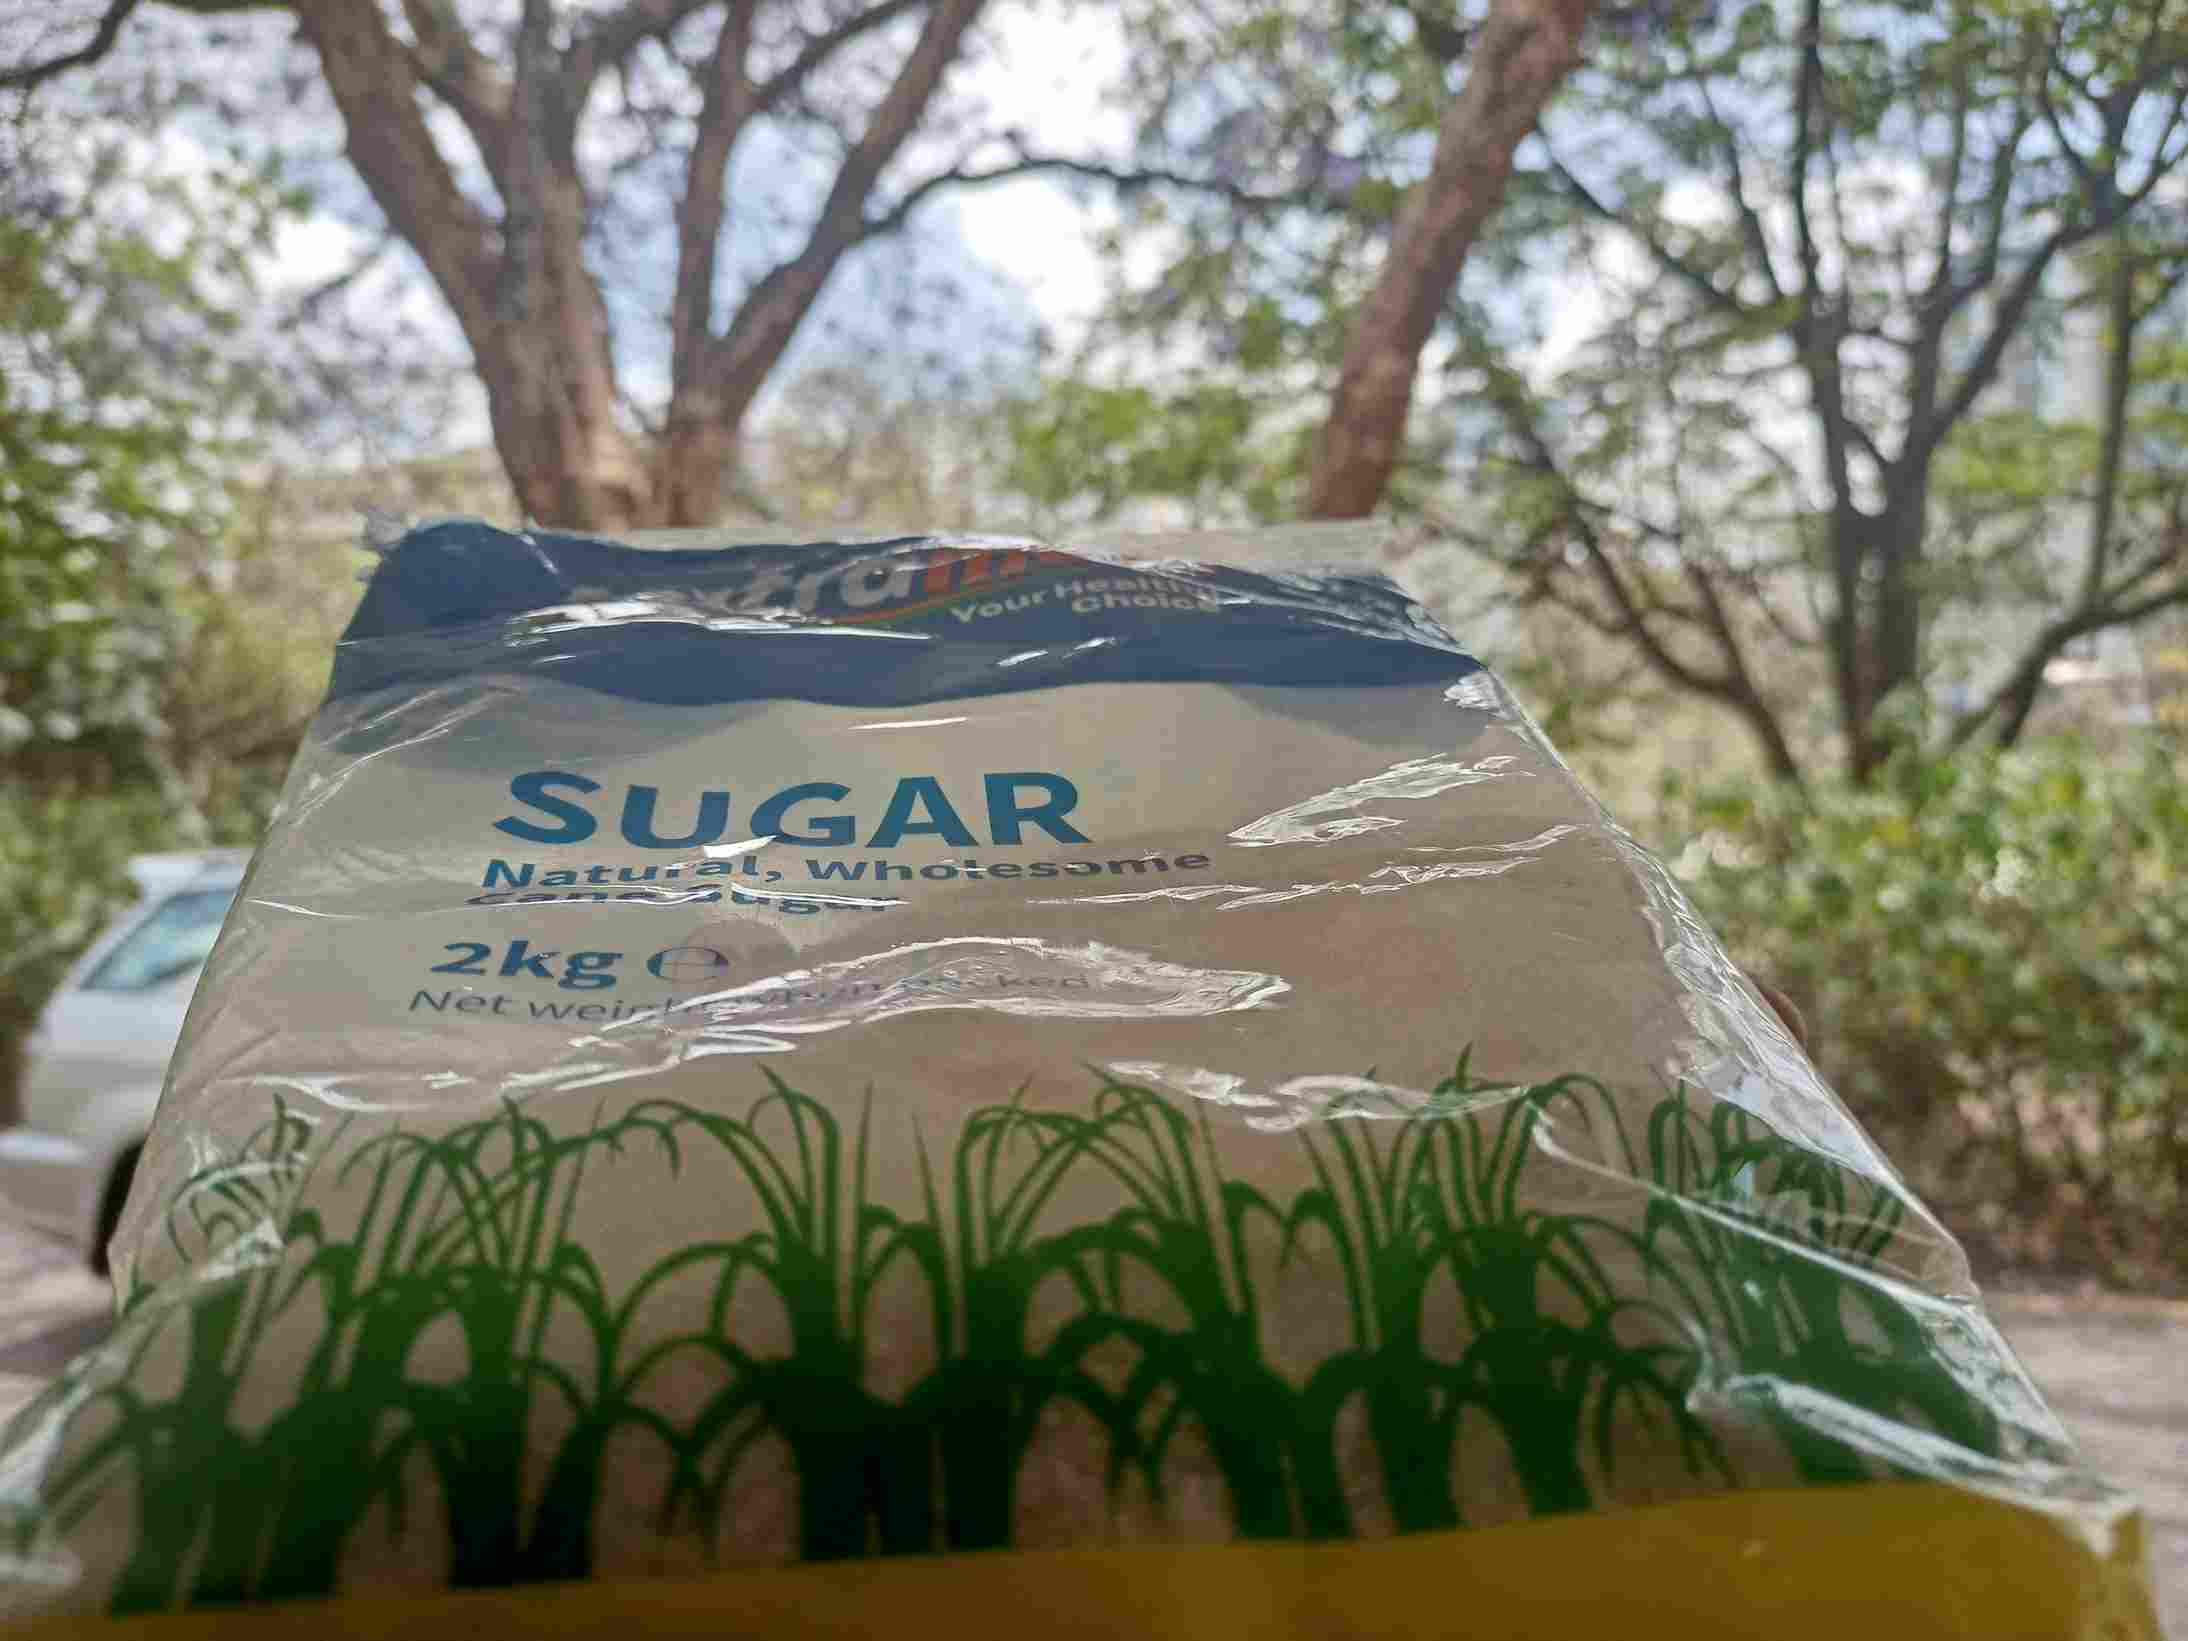 Commodity: A 2Kg Packet of Sugar Now Costs 350 Shillings in Nairobi